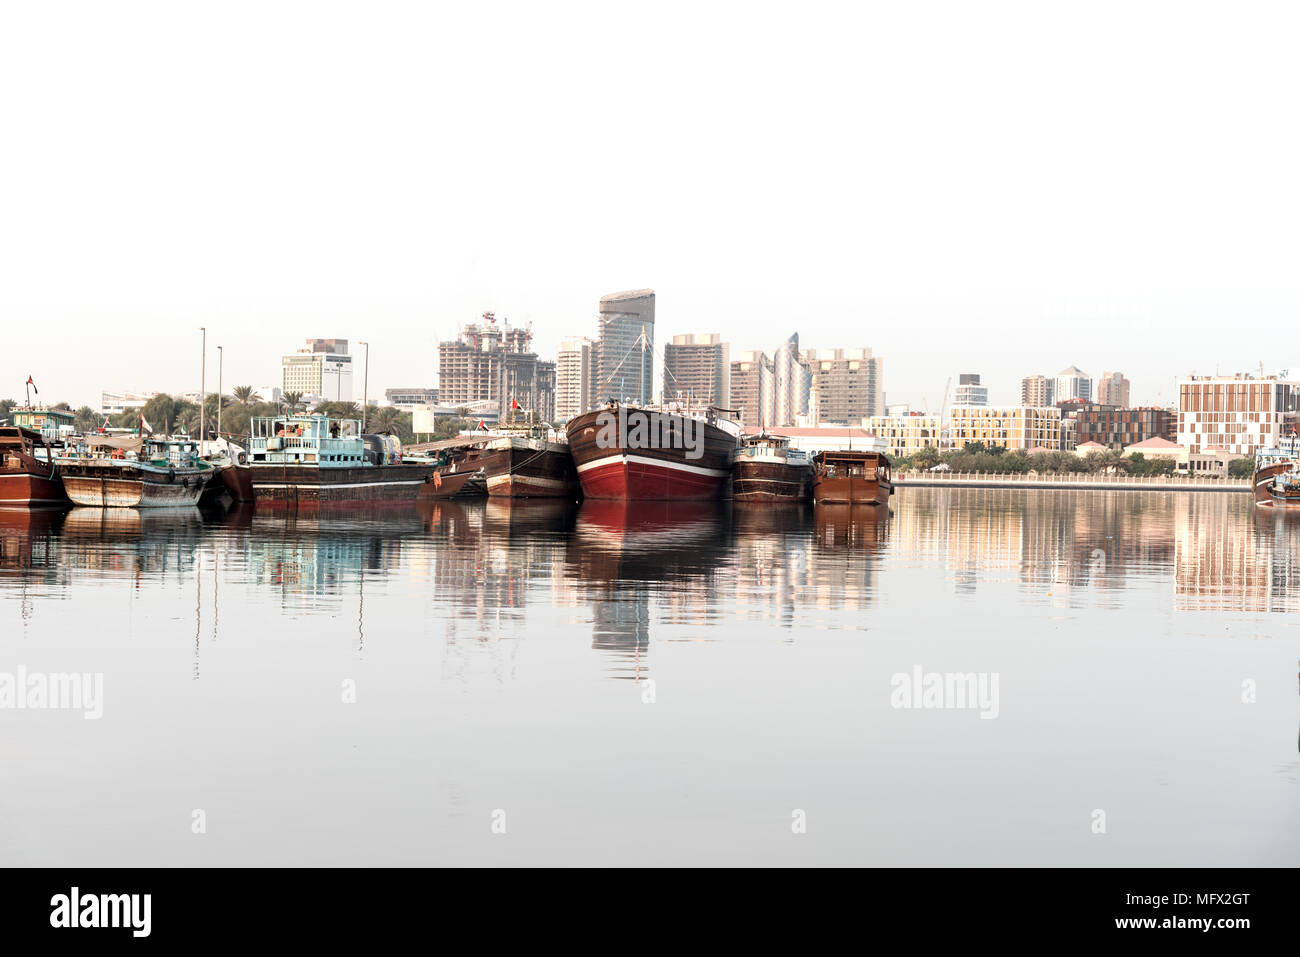 Wooden boats docked in front of the Dubai city skyline. Stock Photo